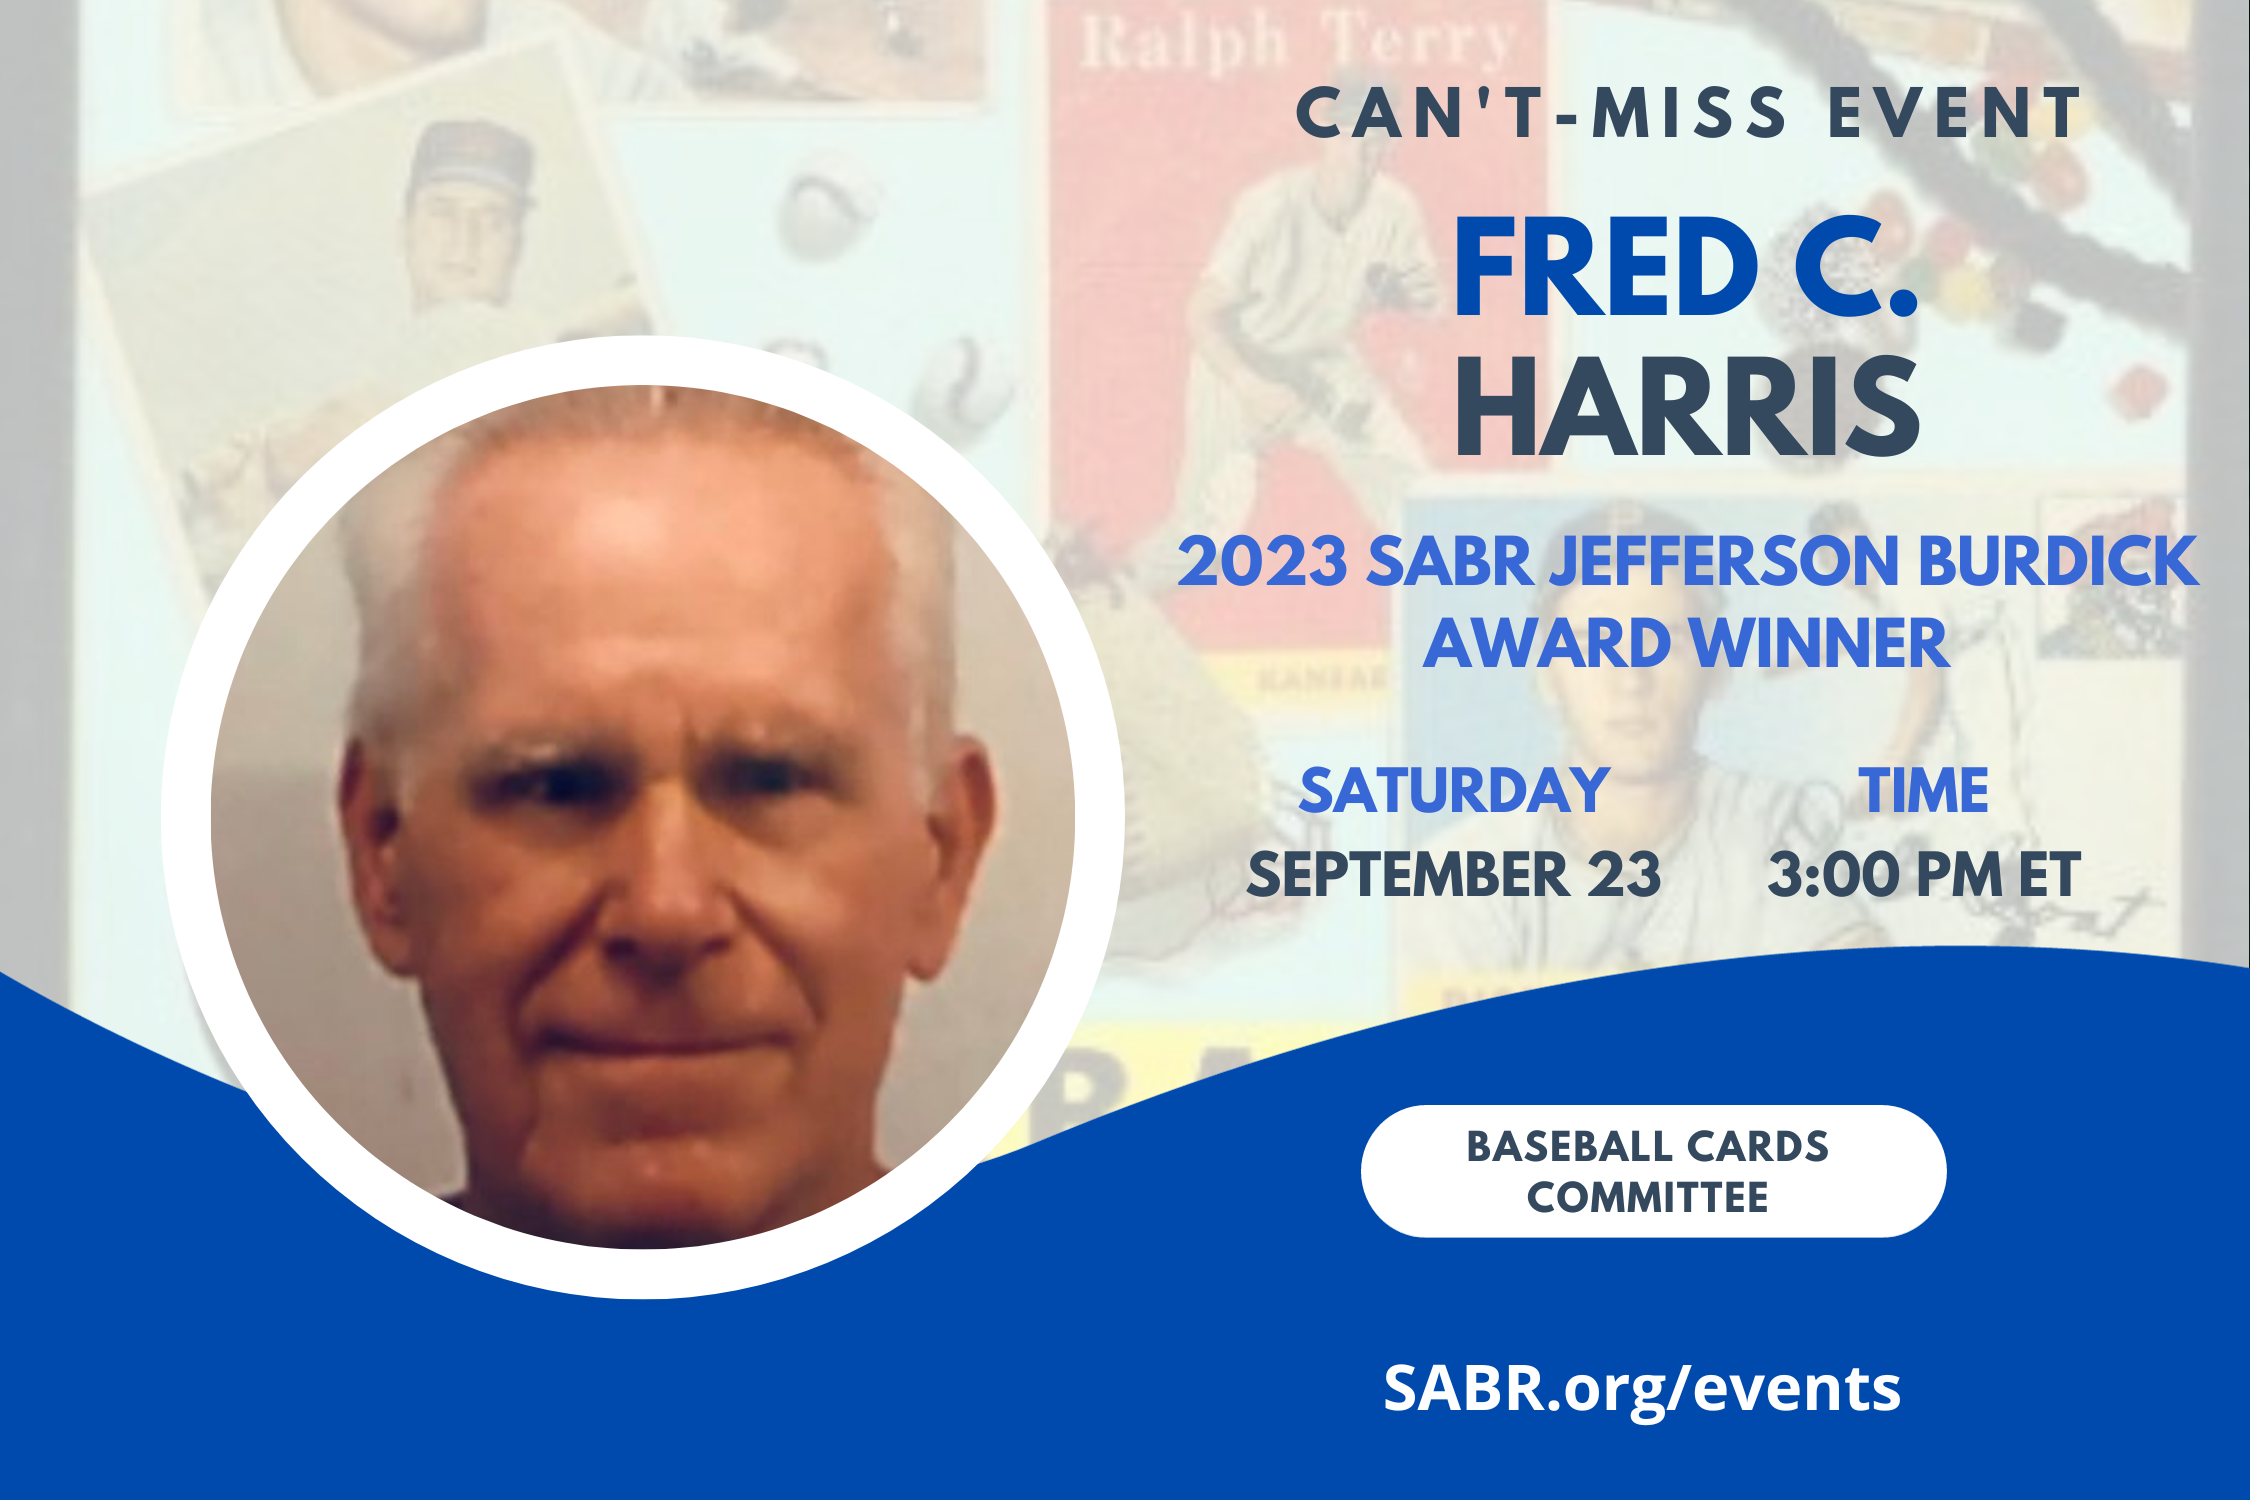 The SABR Baseball Cards Committee will hold a virtual Zoom meeting at 3:00 p.m. ET on Saturday, September 23, 2023. All baseball fans are invited to attend.
 
At this meeting, we will honor 2023 Jefferson Burdick Award winners Brendan C. Boyd and Fred C. Harris.